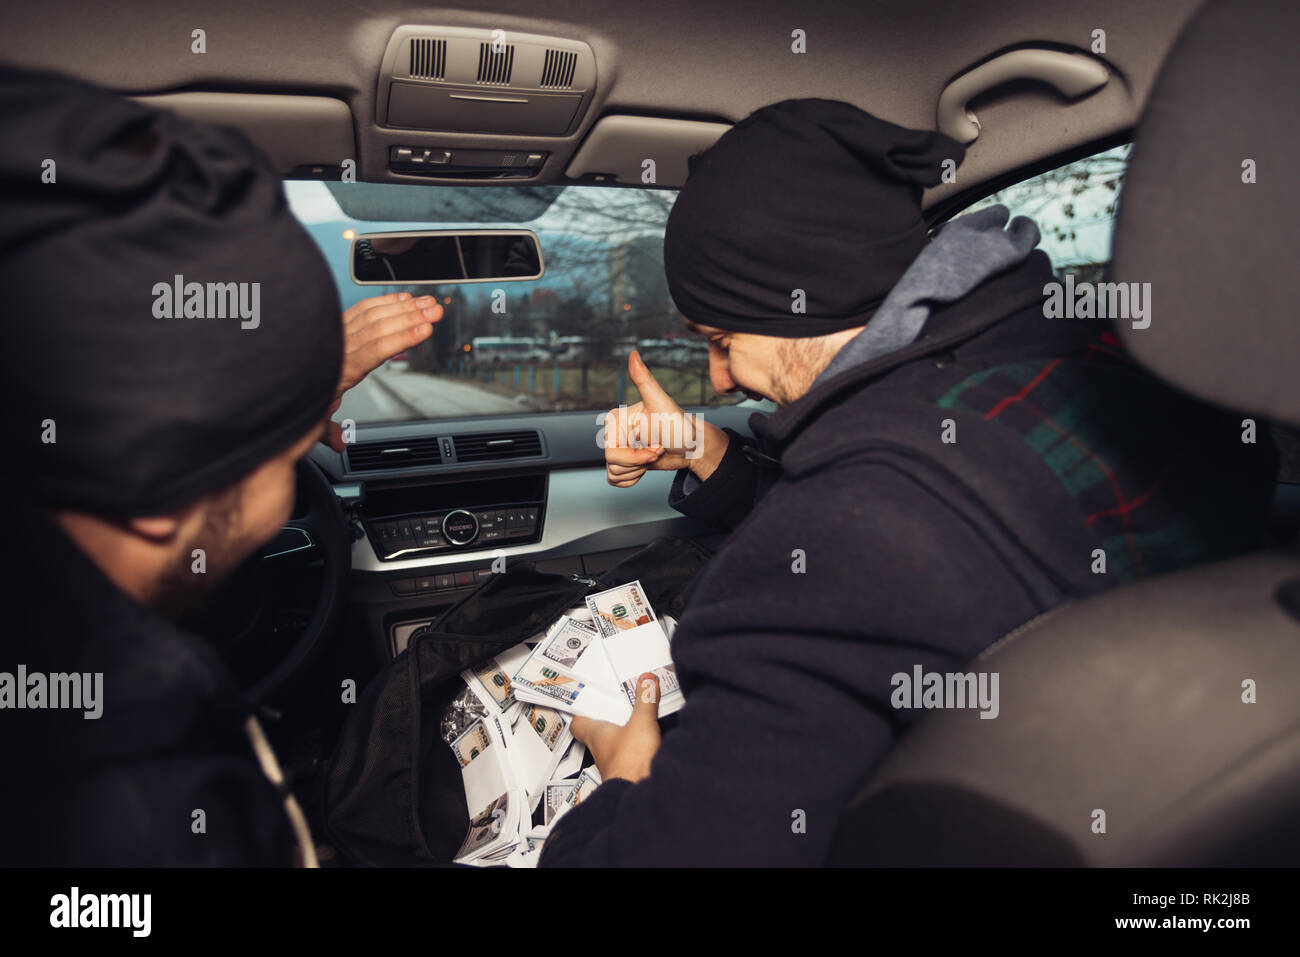 After the successful bank robbery, the thieves are sitting in the car showing off their money and celebrating the win over the law they had. Stock Photo